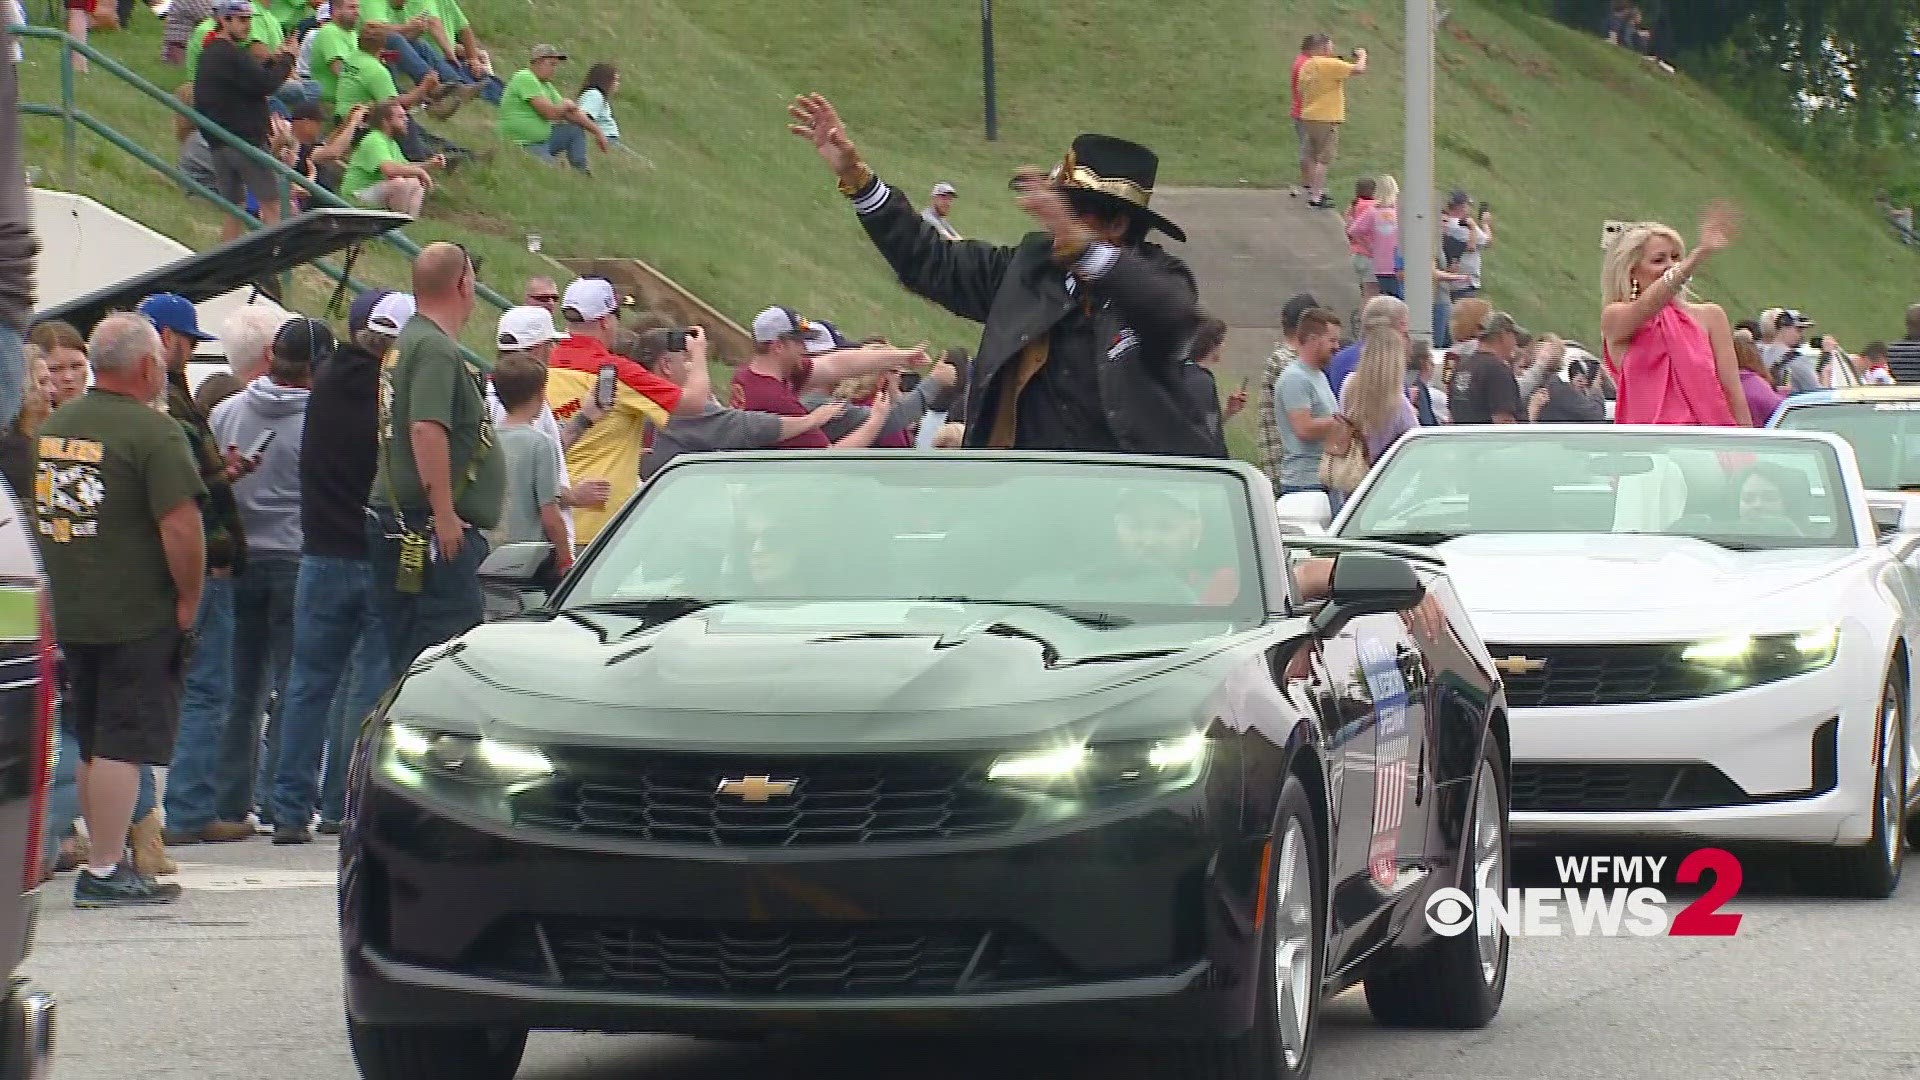 Richard Petty led NASCAR trucks through Wilkes County as fans watched the haulers carrying their favorite driver's cars.